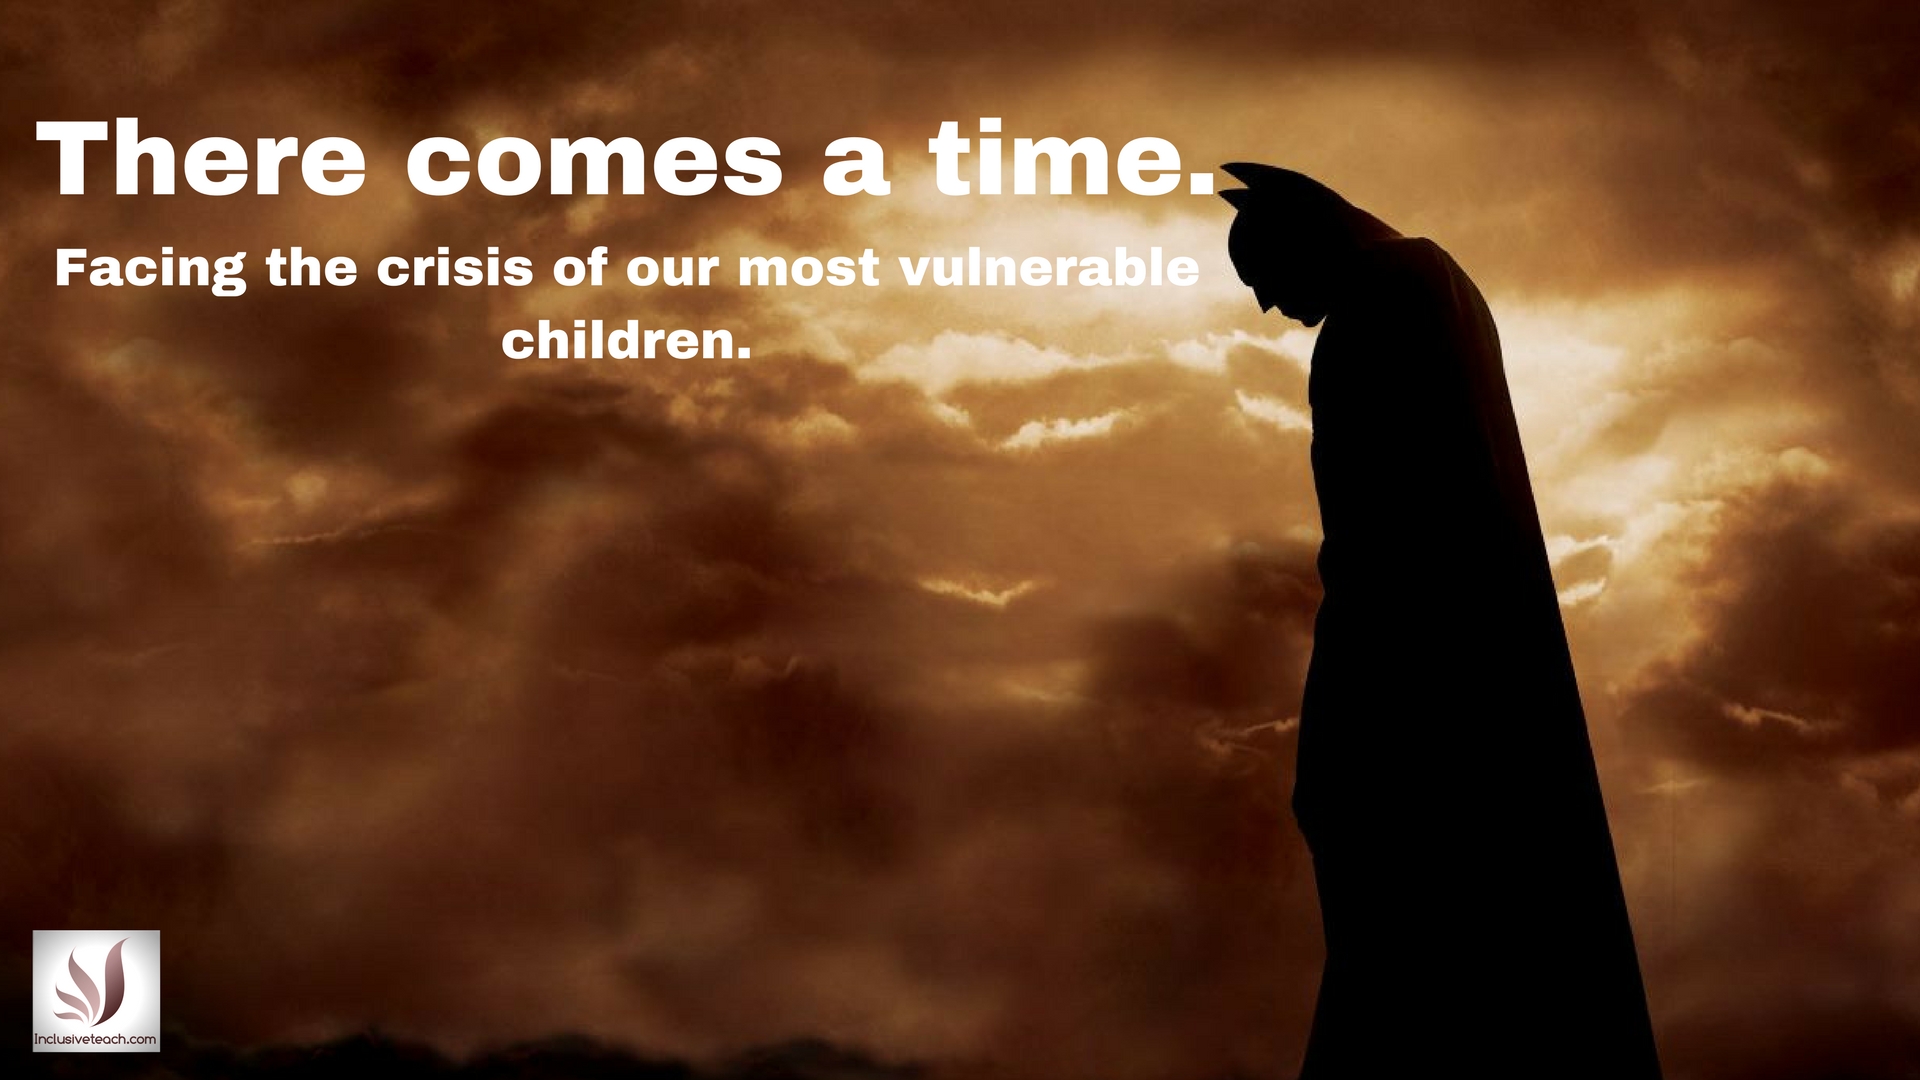 The Mental Health crisis facing our most vulnerable children.